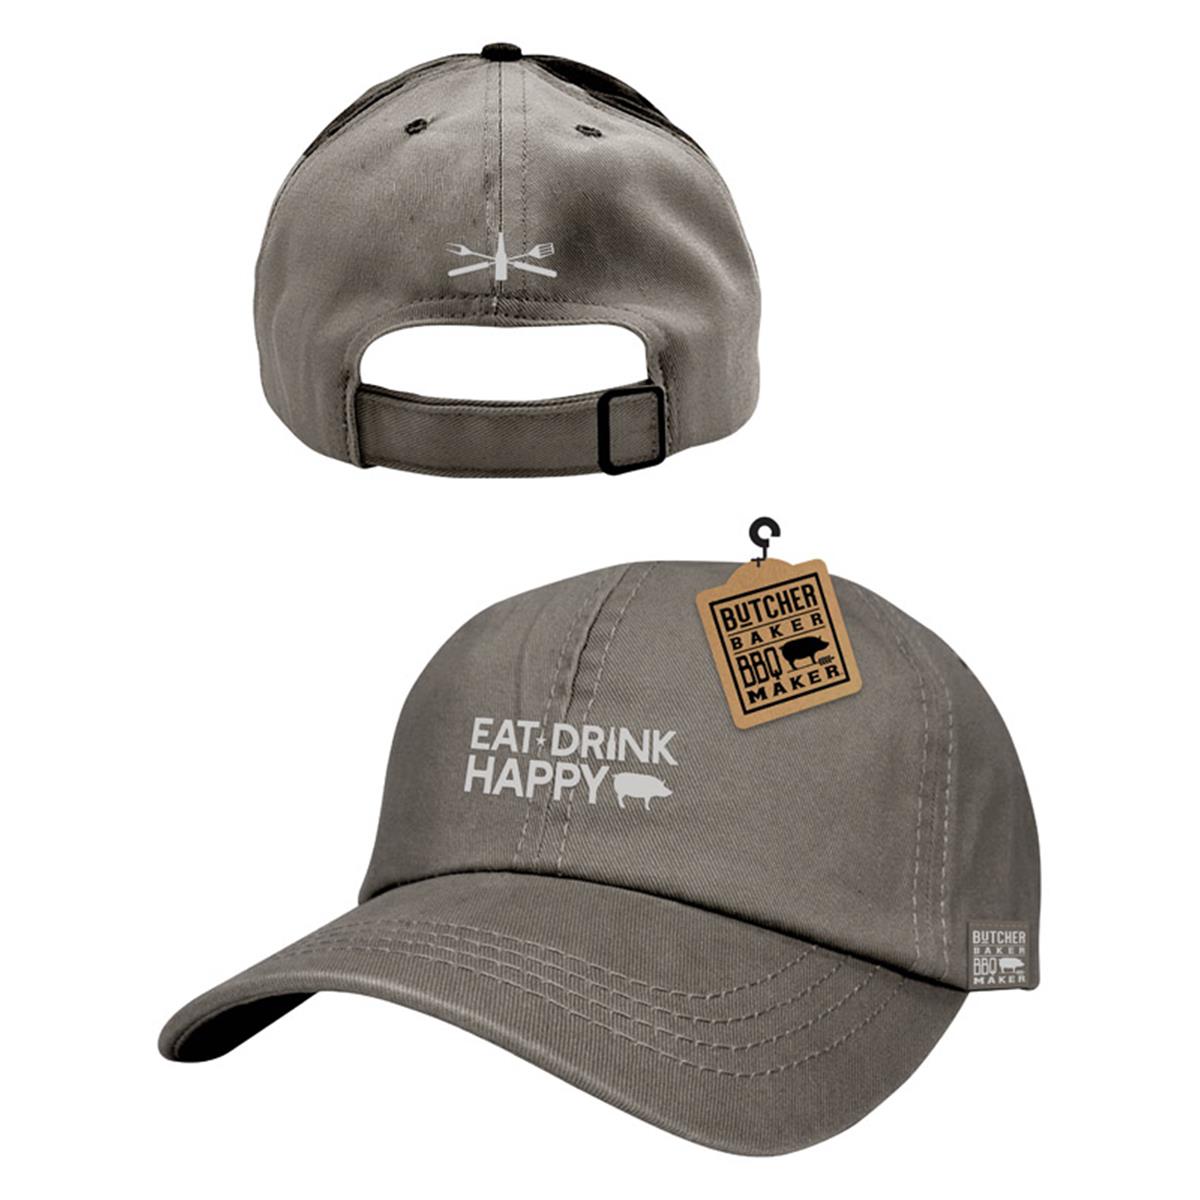 Picture of Open Road Brands 9731795 Eat Drink Happy Cap - Pack of 6